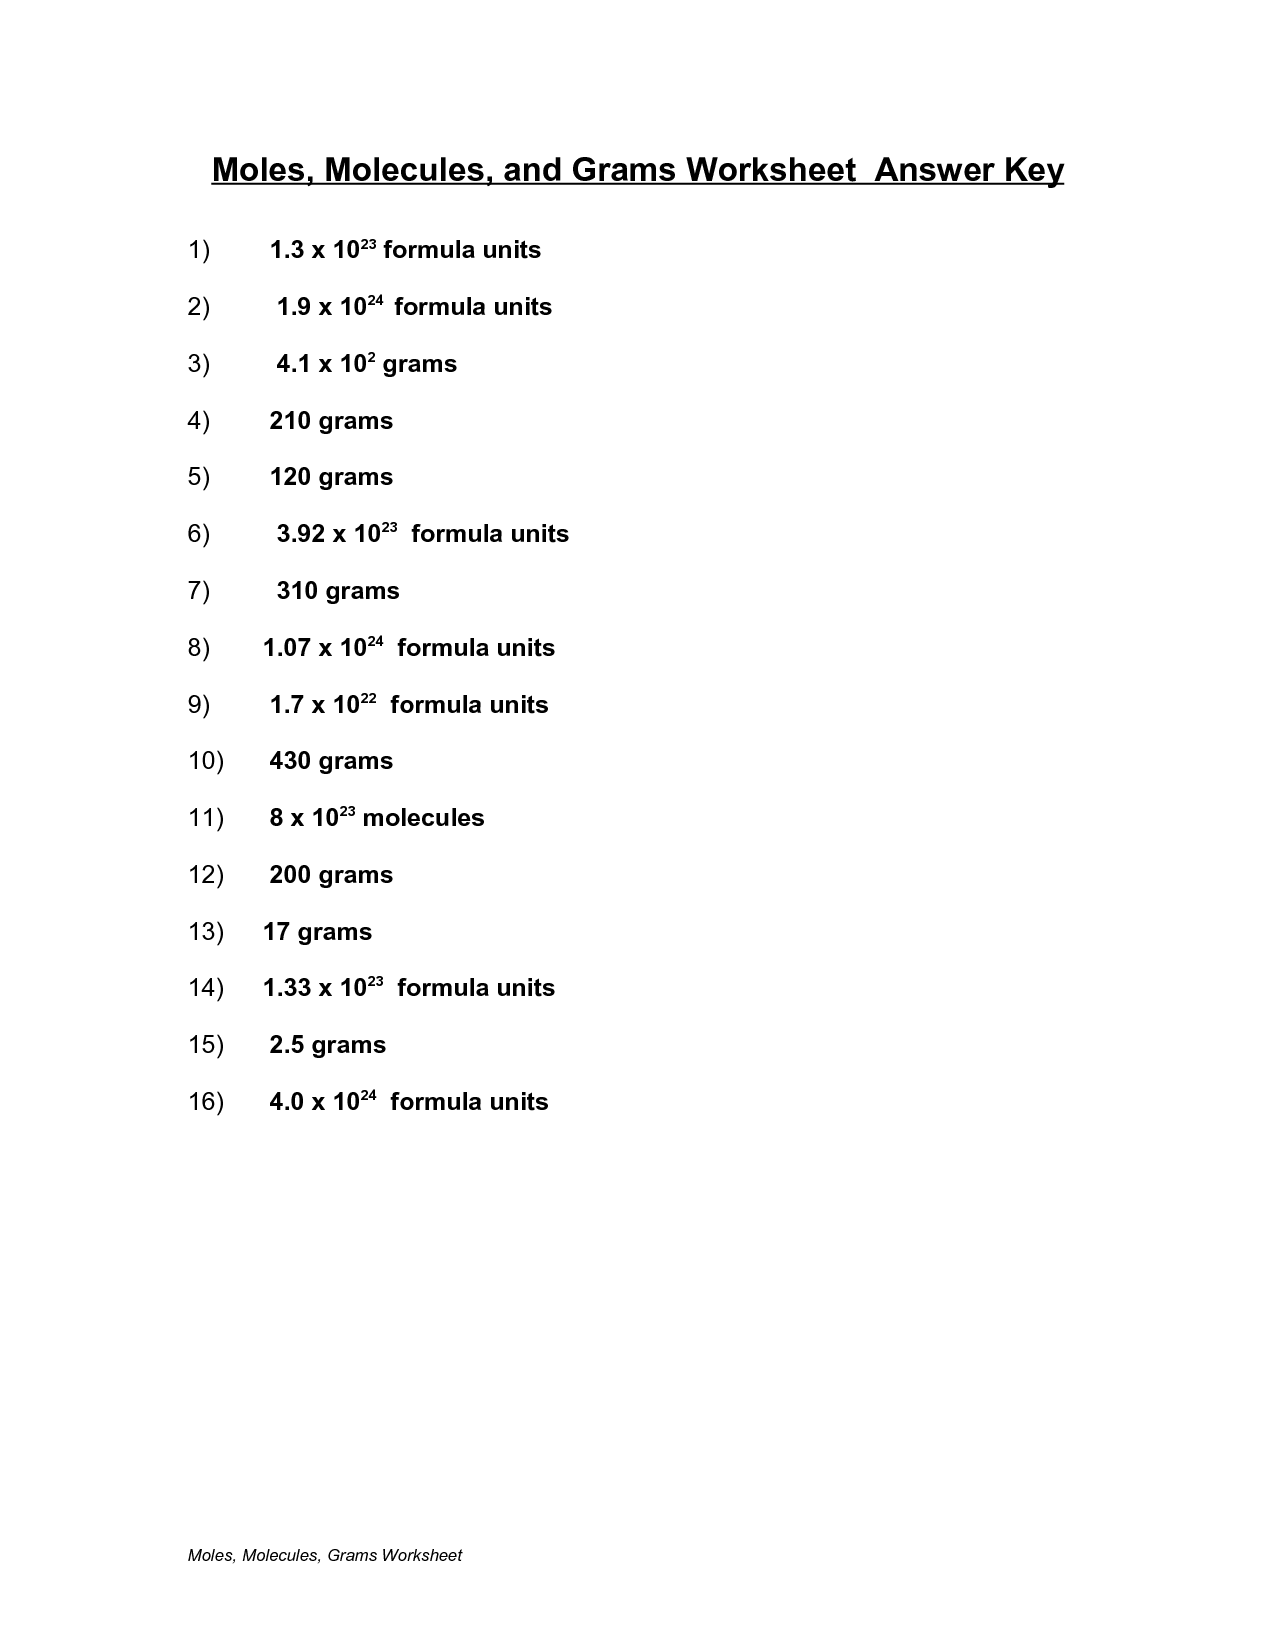 get-answer-moles-molecules-and-grams-worksheet-and-key-atoms-or-transtutors